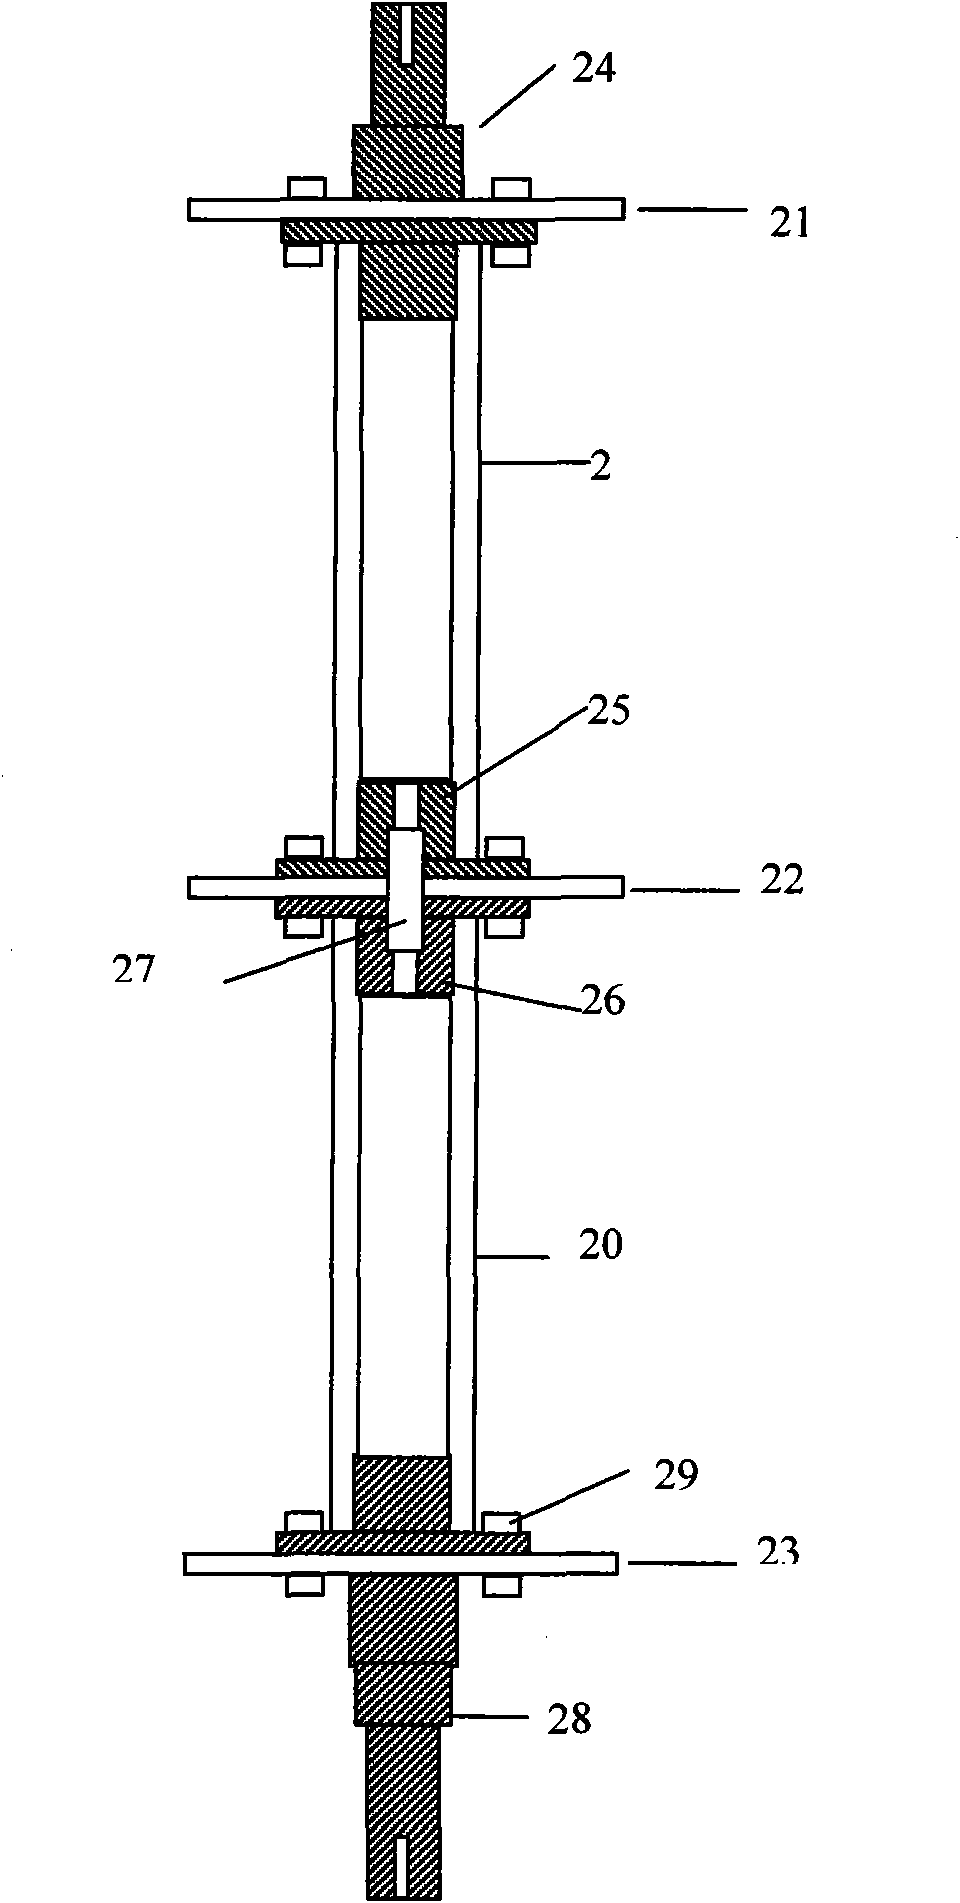 Wind collecting vertical type wind power generating system